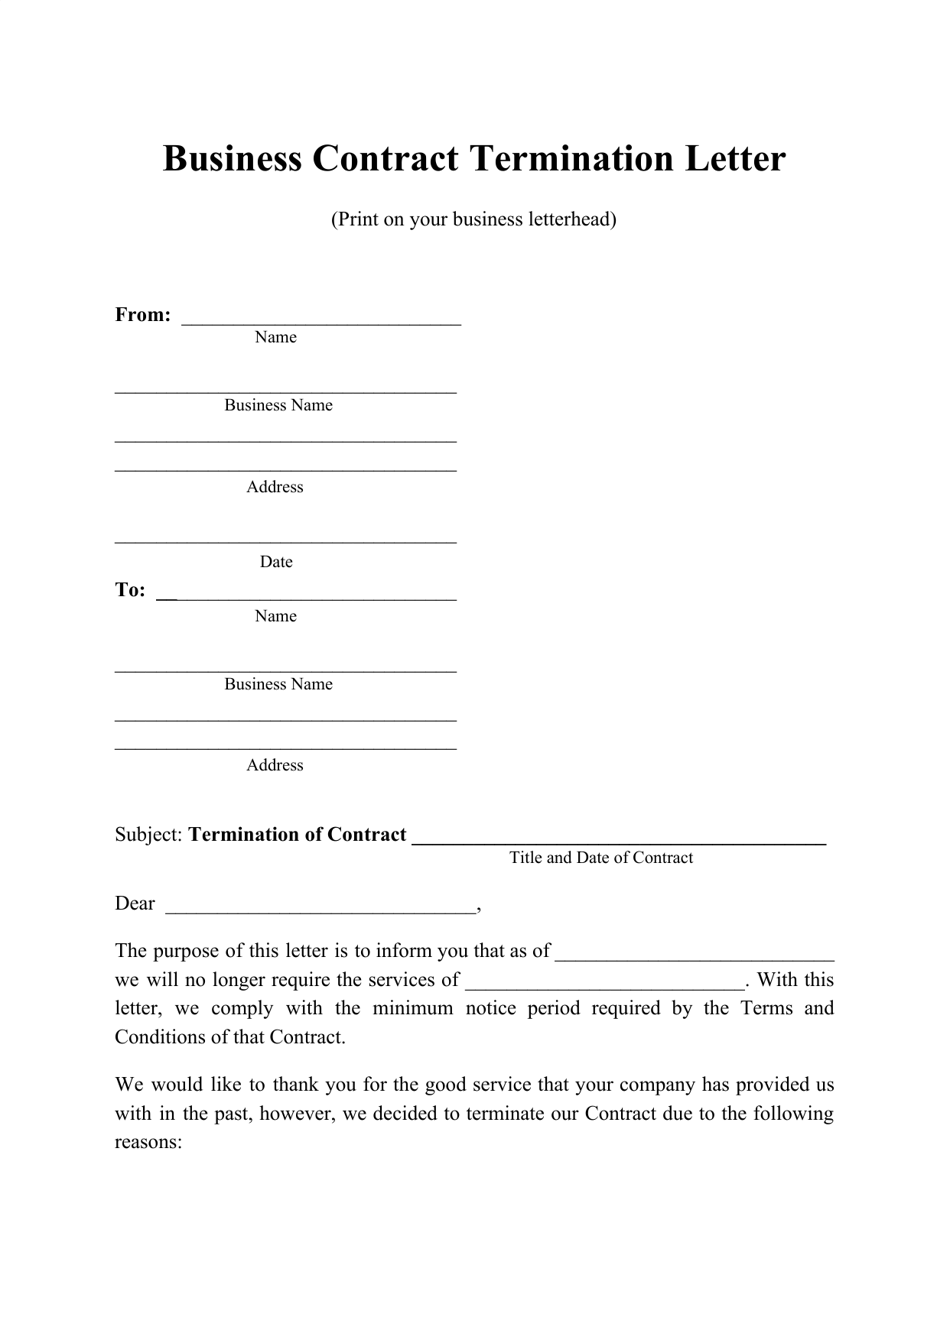 Business Contract Termination Letter Template Download Printable